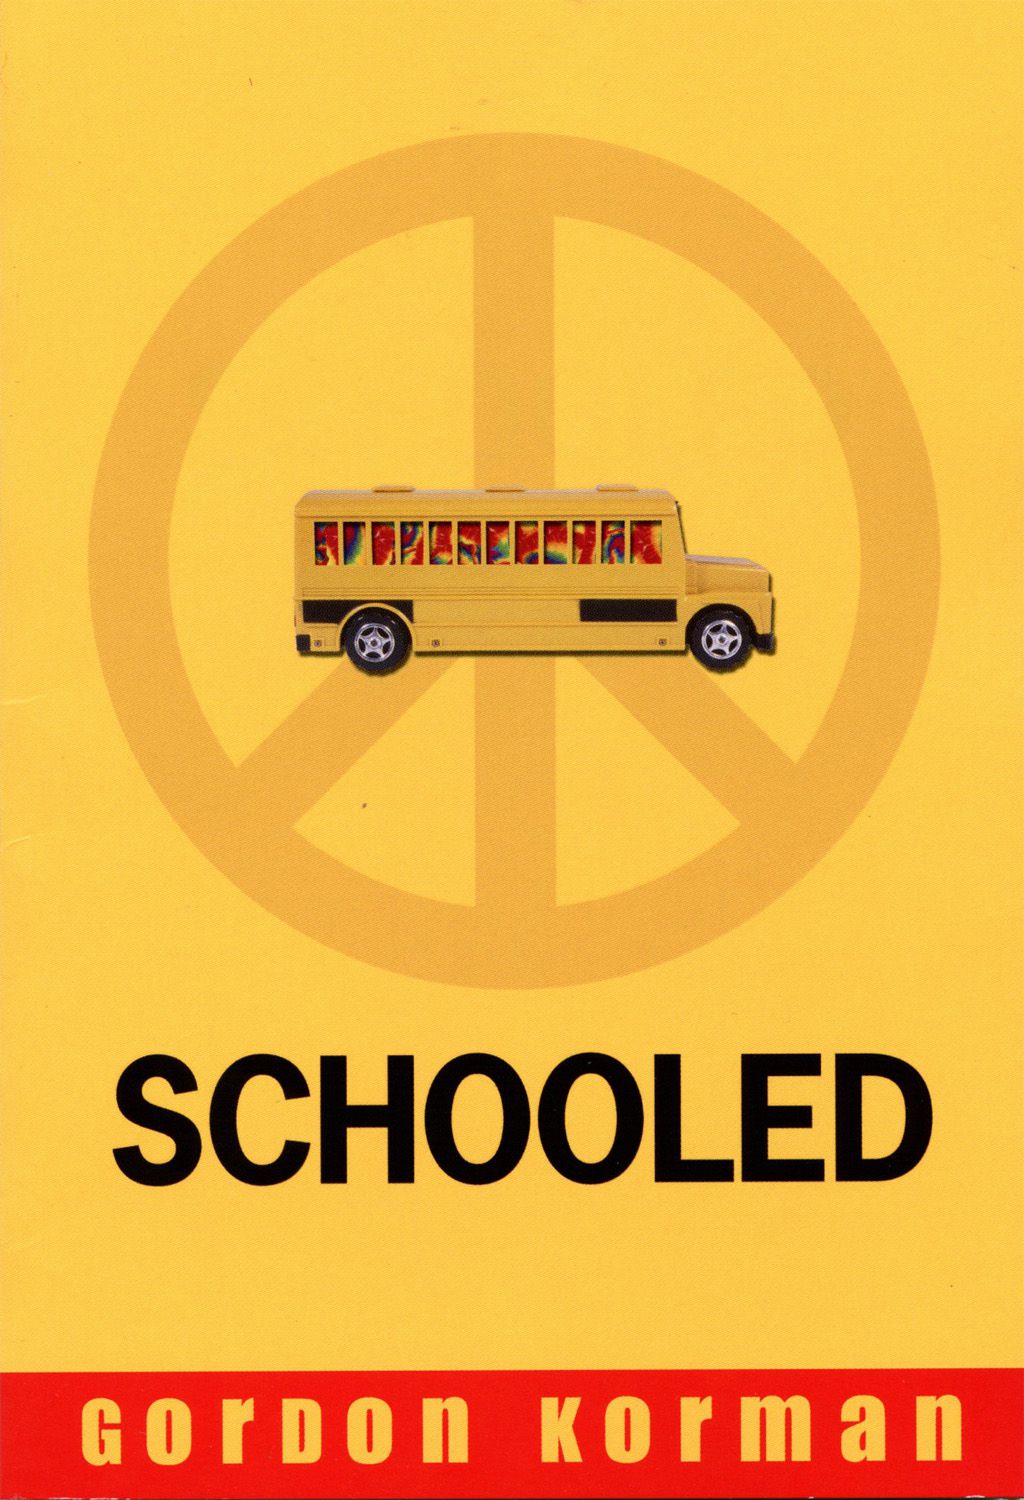 cover of the book Schooled shows a school bus superimposed over a peace sign